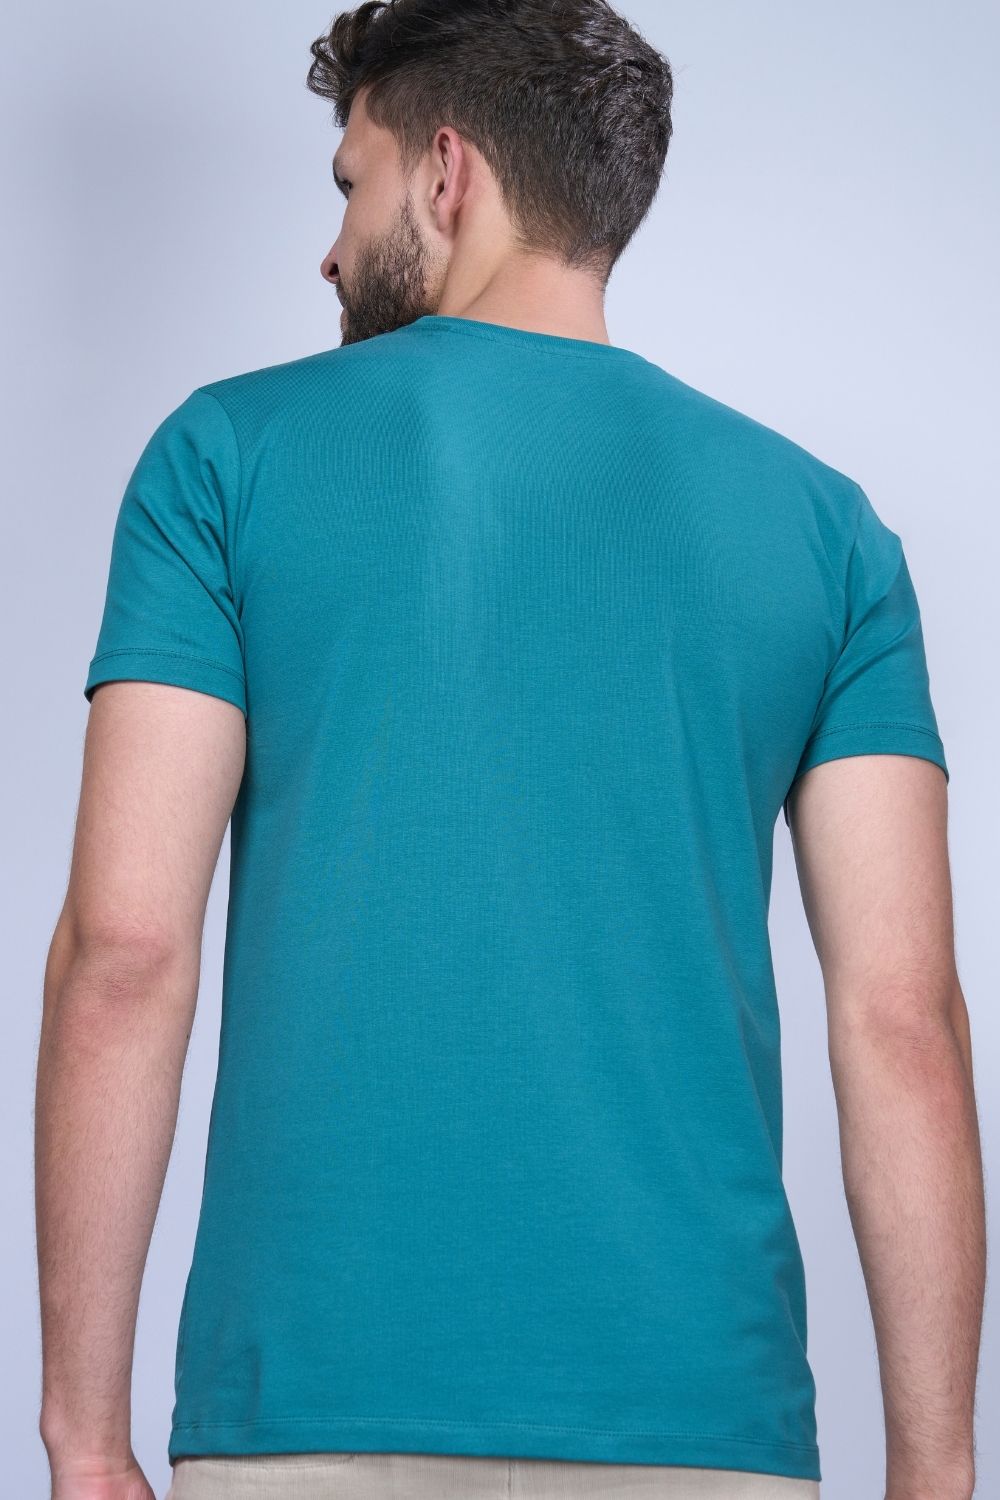 Cotton Stretch T shirt for men in the the solid color British Green with half sleeves and round neck, back view.